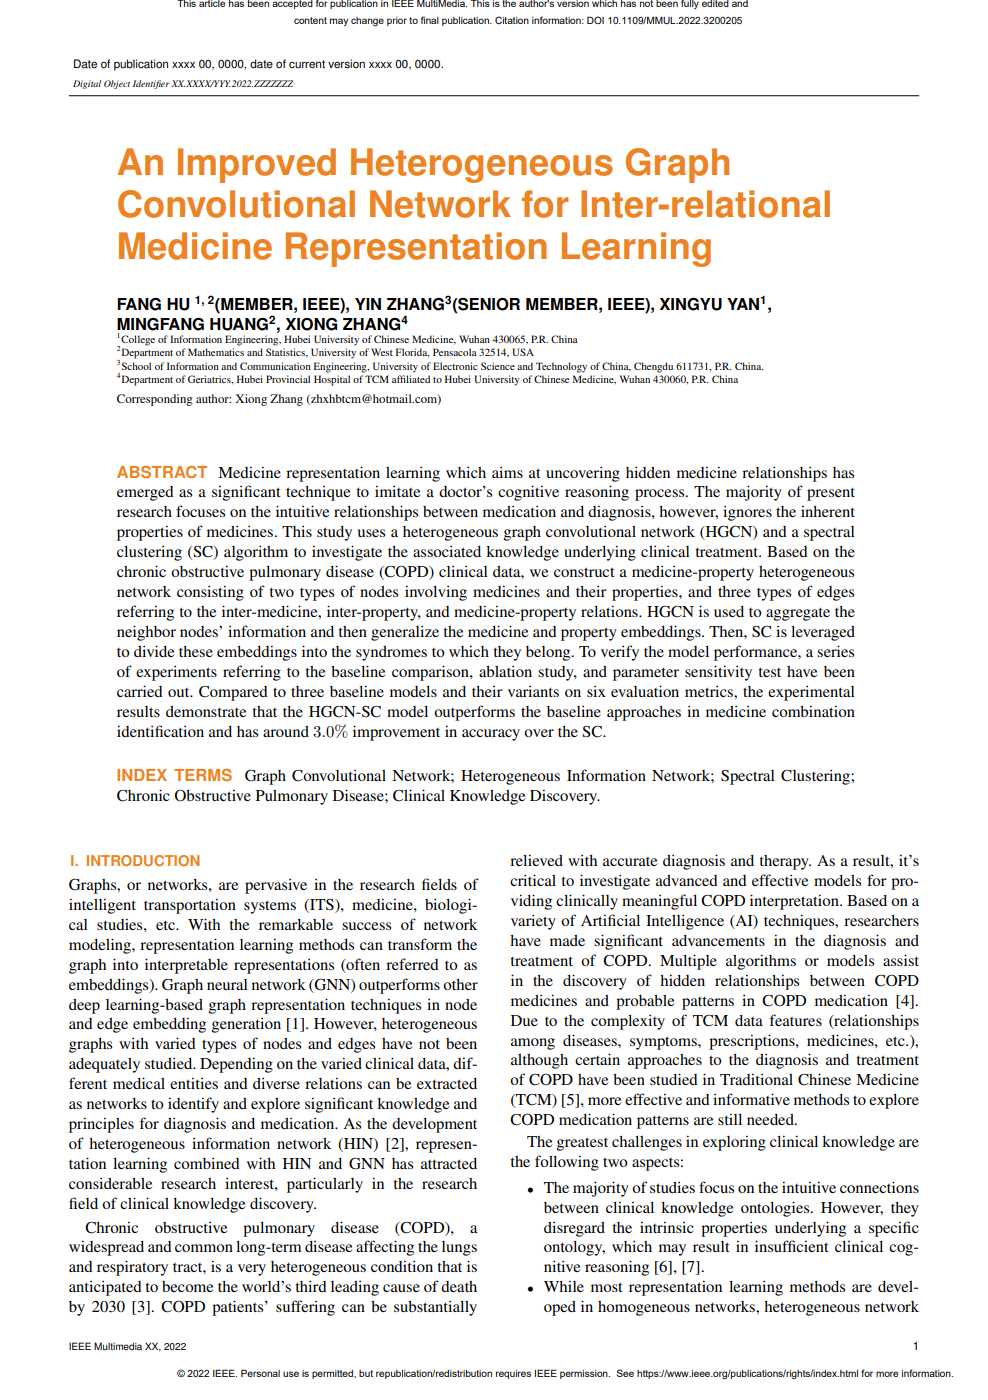 An Improved Heterogeneous Graph Convolutional Network for Inter-Relational Medicine Representation Learning （SCI）